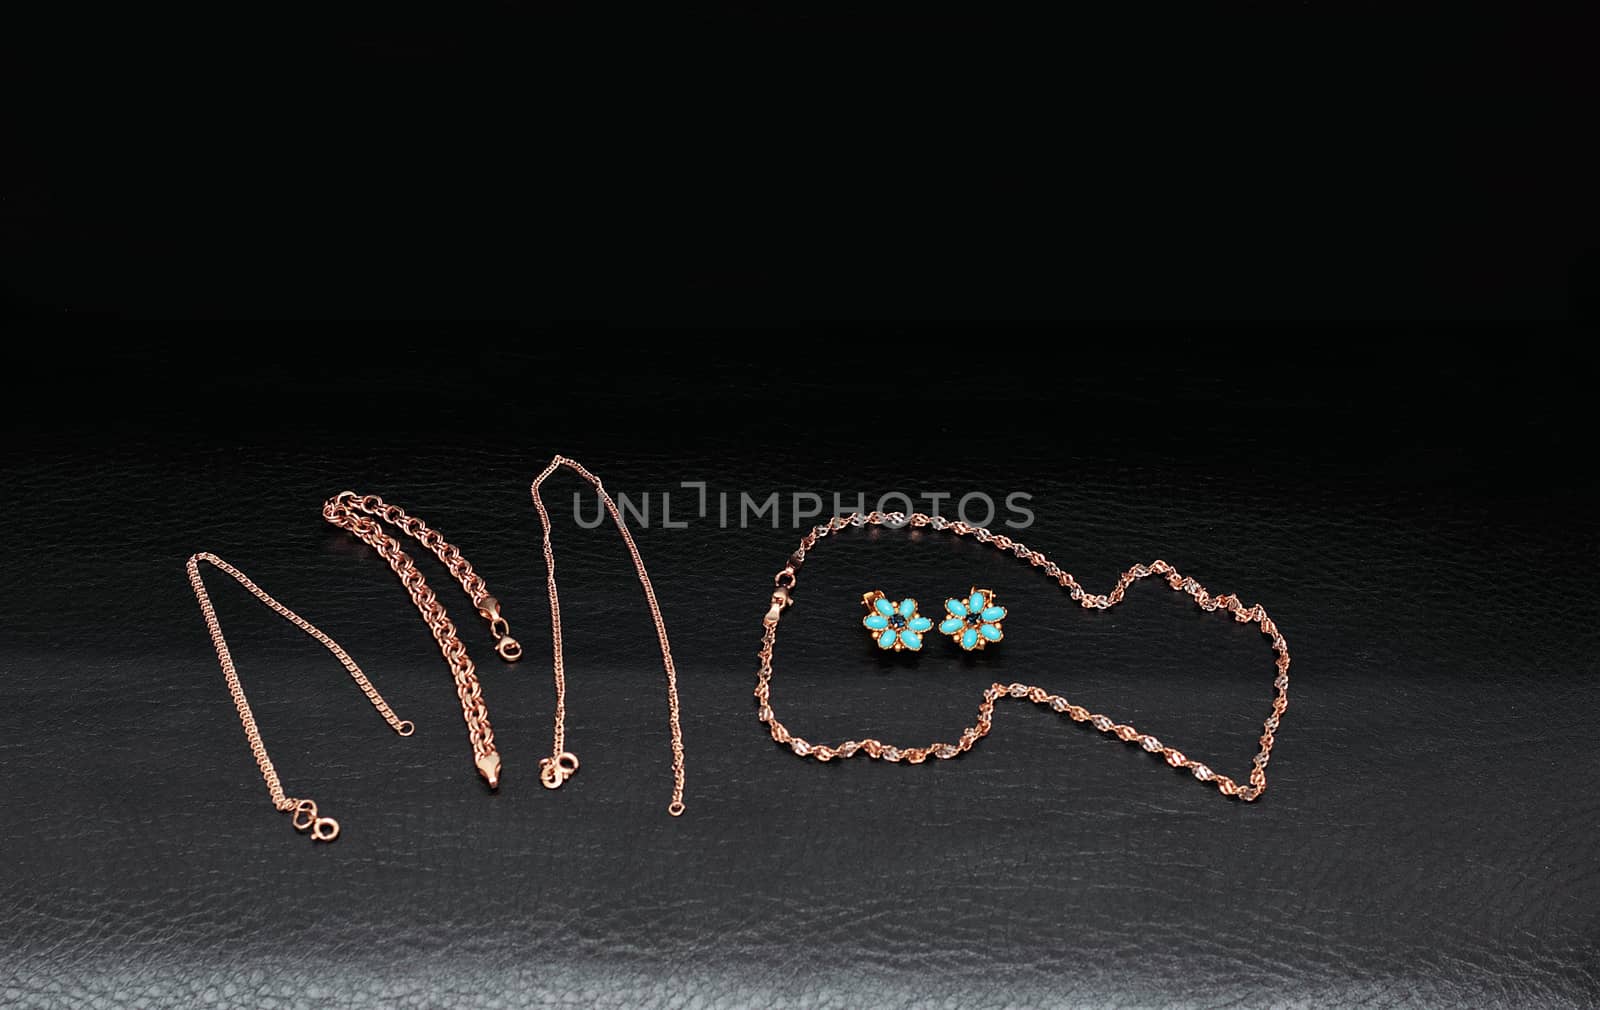 Womens gold jewelry chain, bracelets, earrings isolated black background.